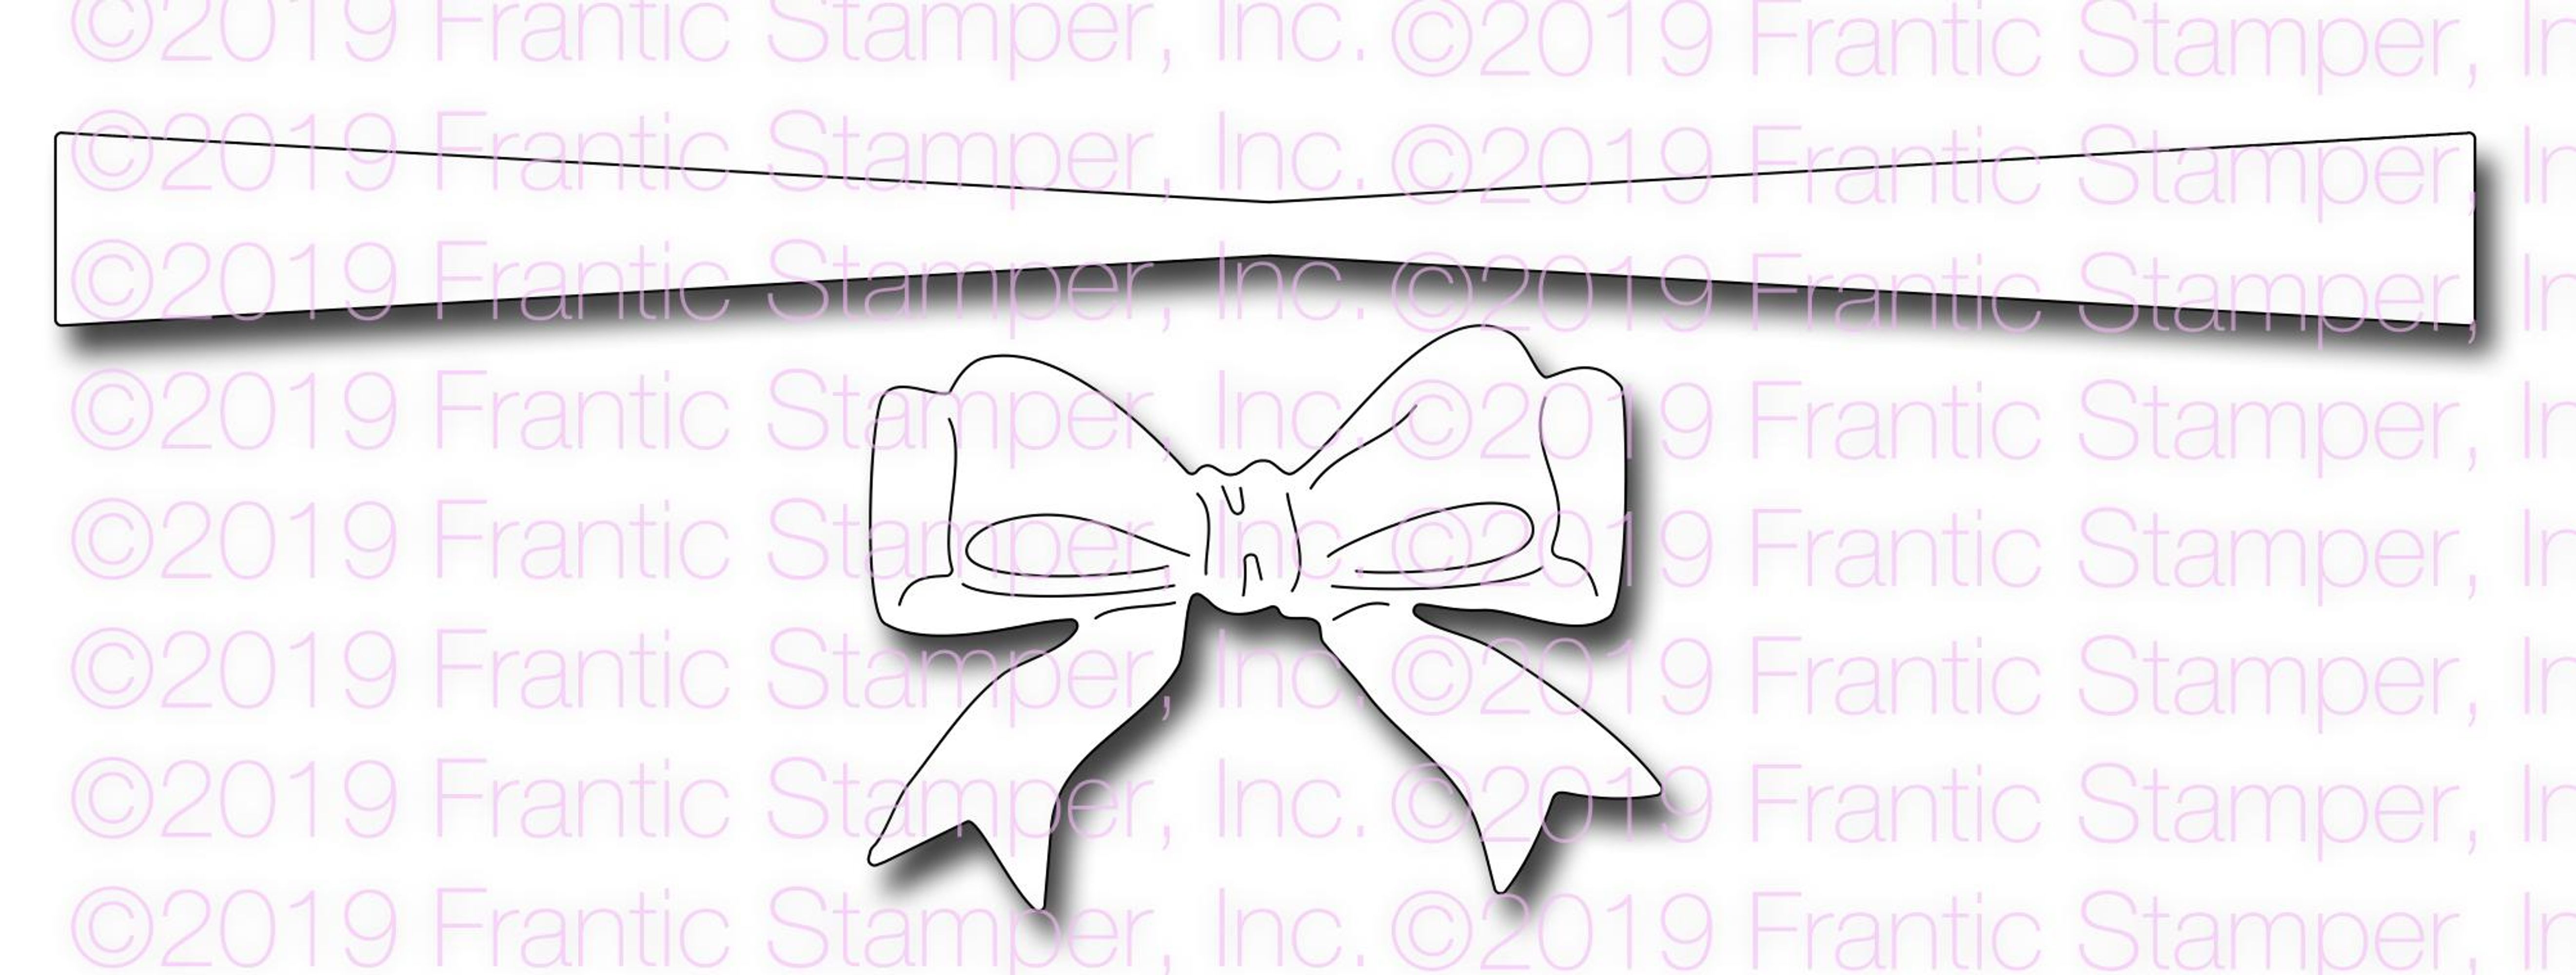 Frantic Stamper Precision Die - Cinched Ribbon Bow